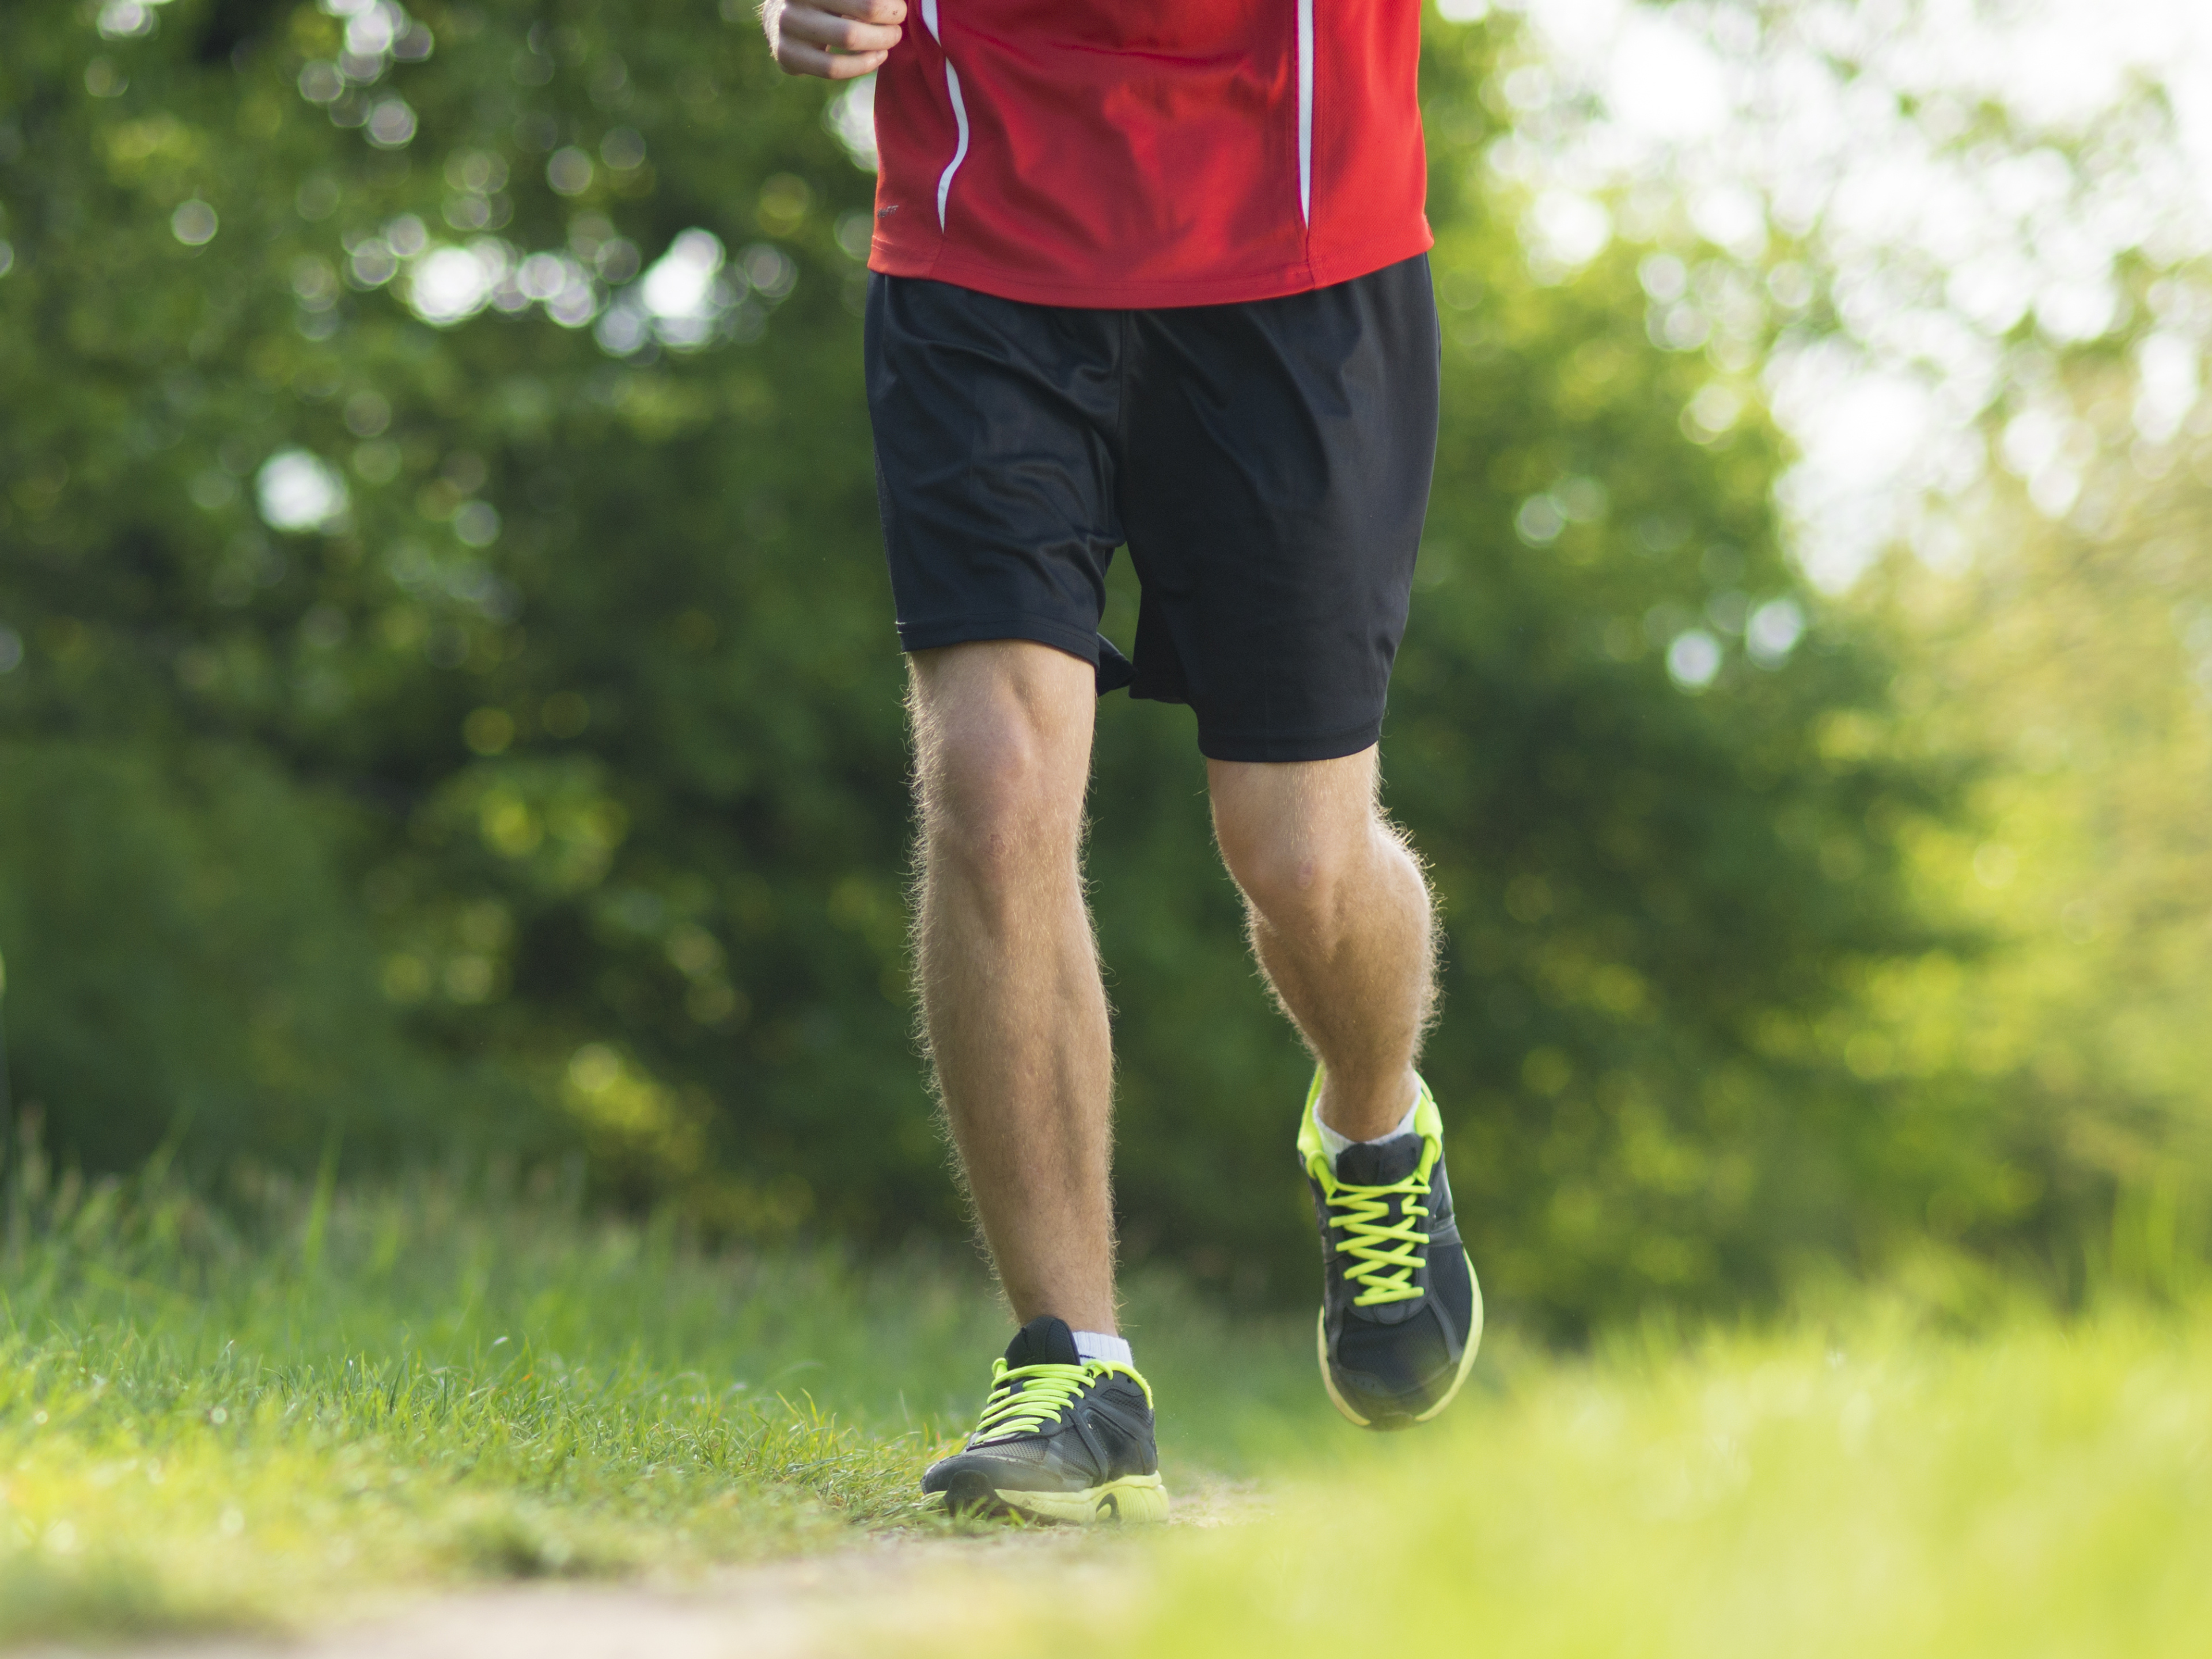 We share our top tips on how to prevent patellar tendonitis when running.